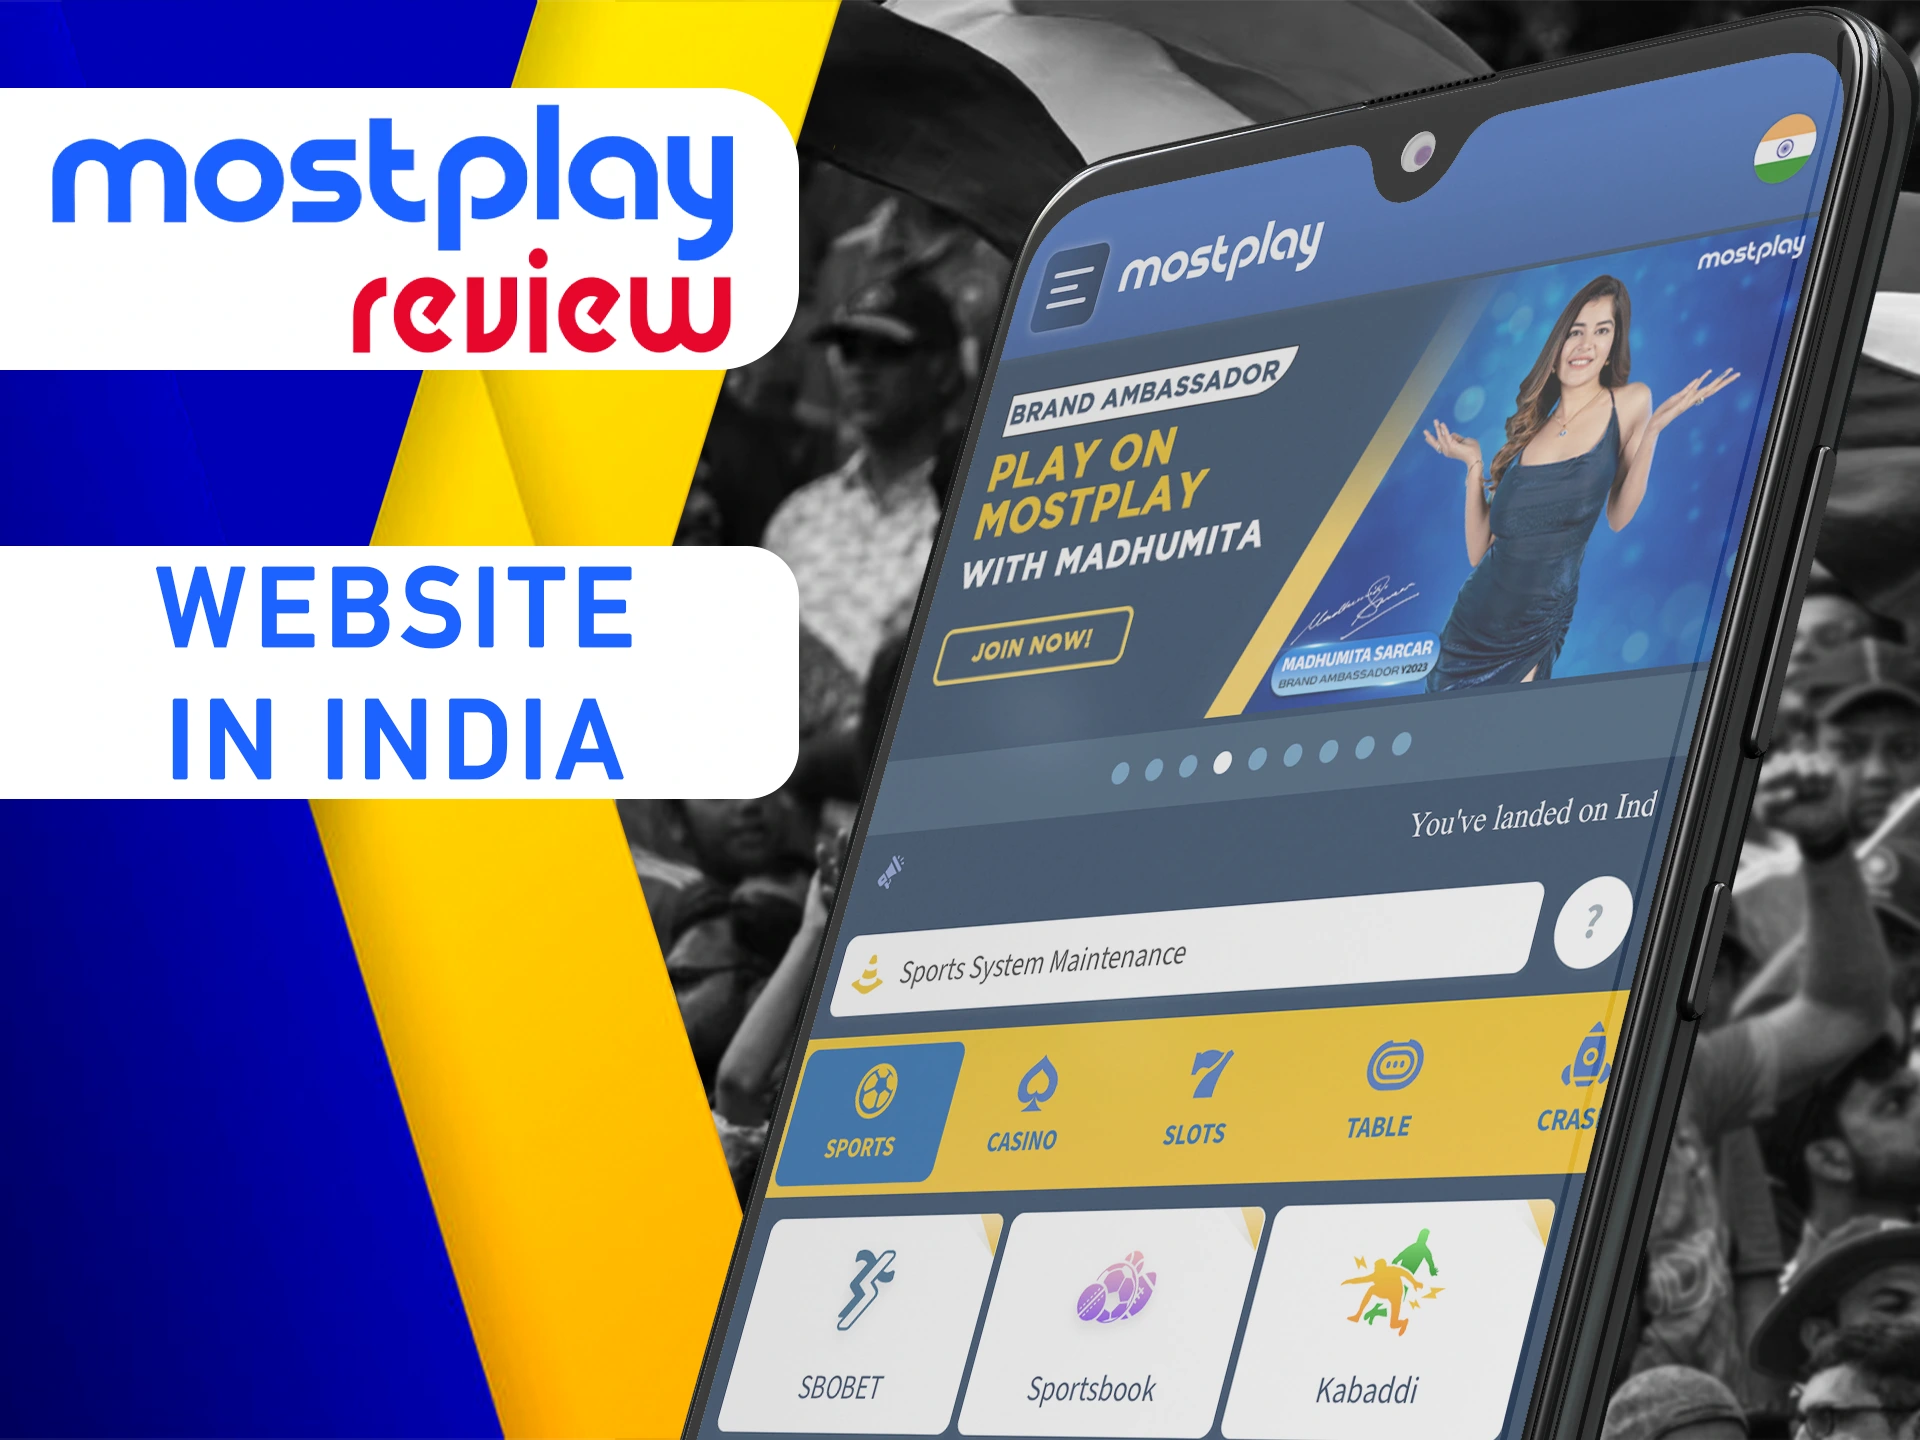 Enter on the Mostplay website using any device.